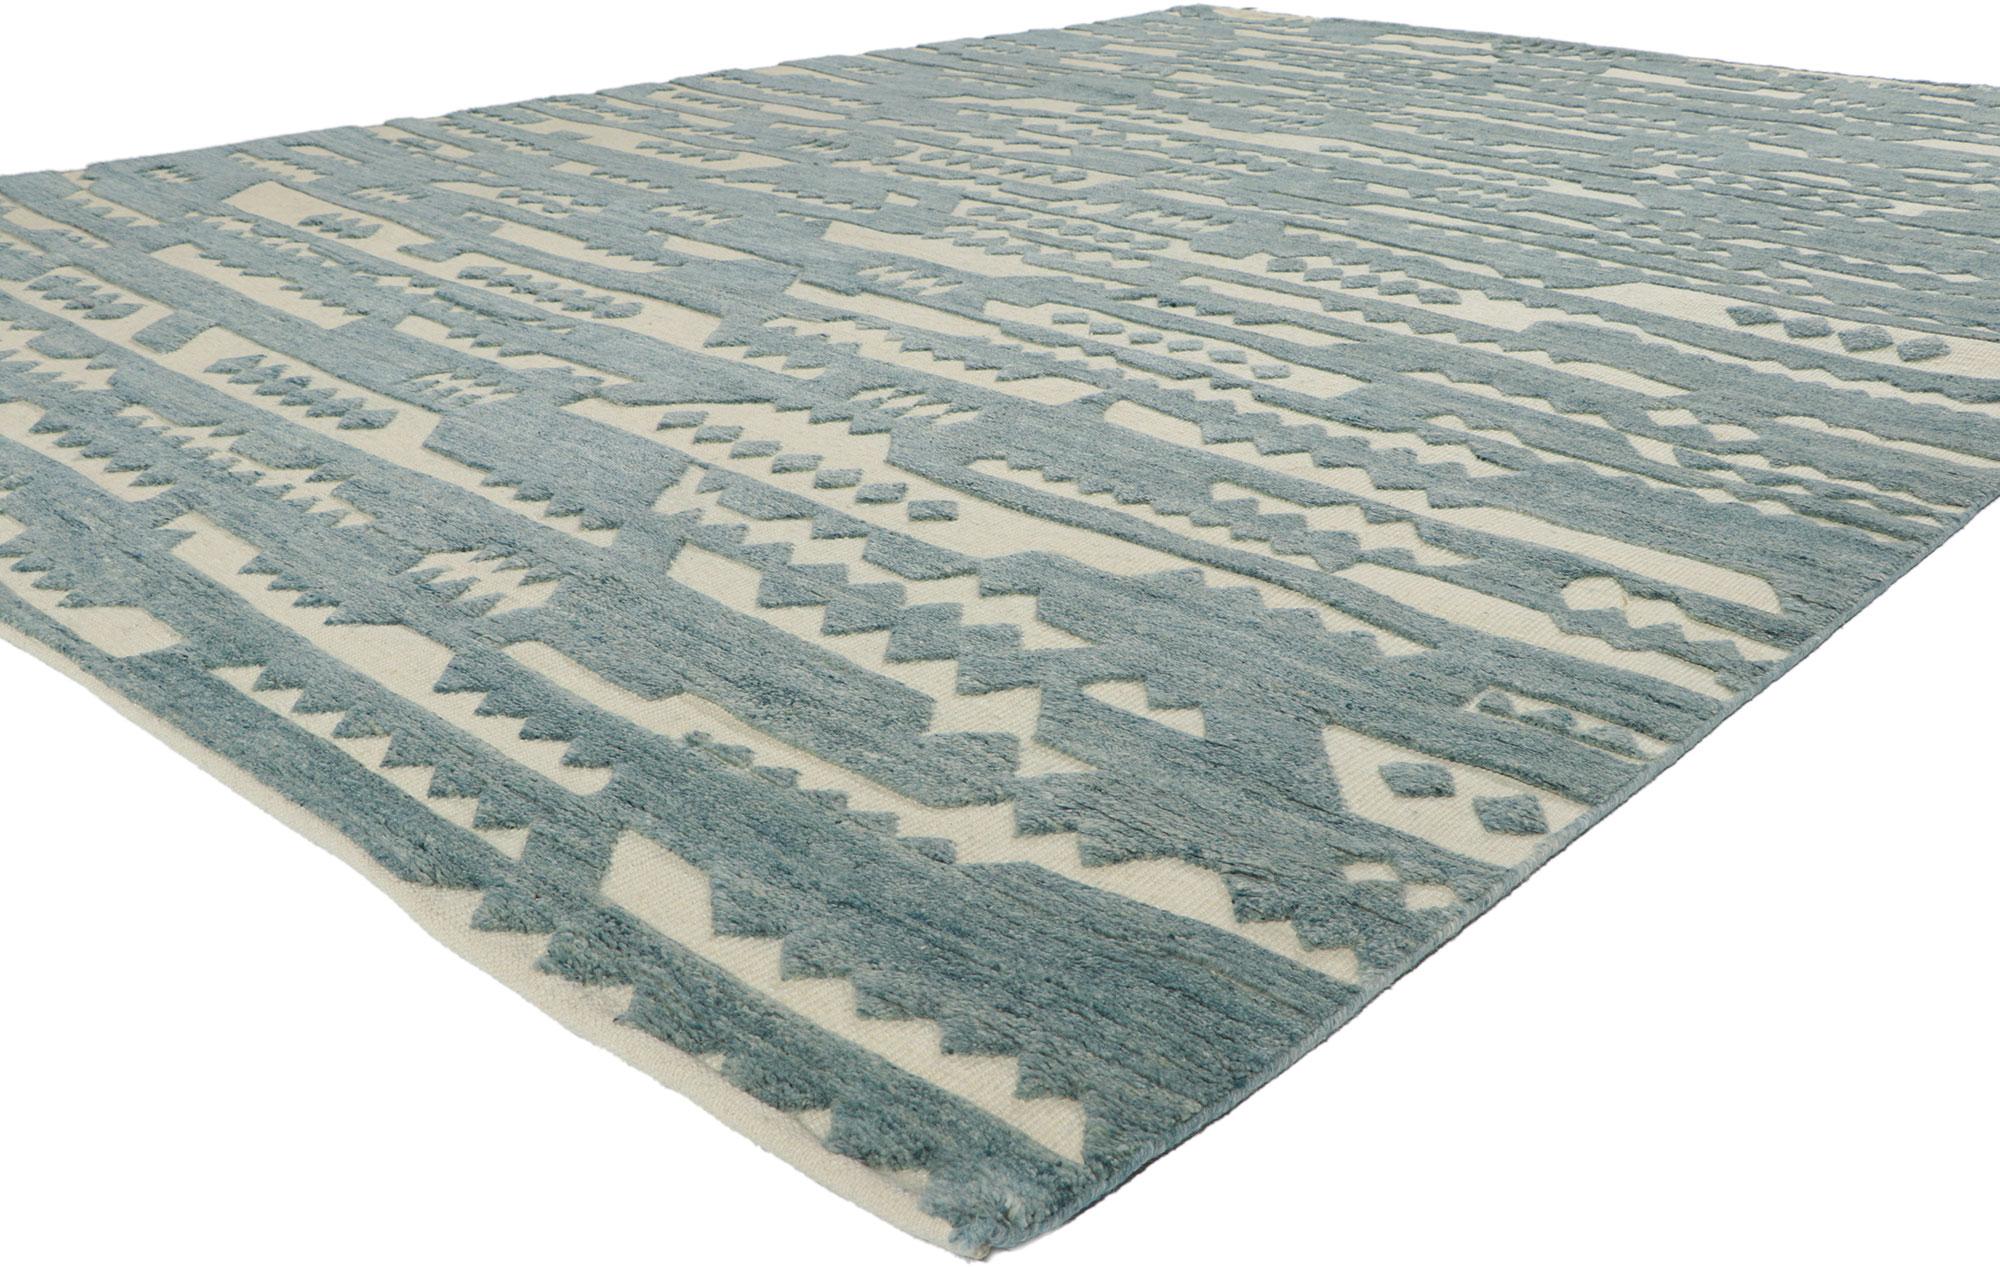 30888 New Contemporary high-low textured rug, 08'10 x 12'00. With its nomadic charm, incredible detail and texture, this hand knotted wool contemporary high-low rug is a captivating vision of woven beauty. The eye-catching tribal pattern and soft